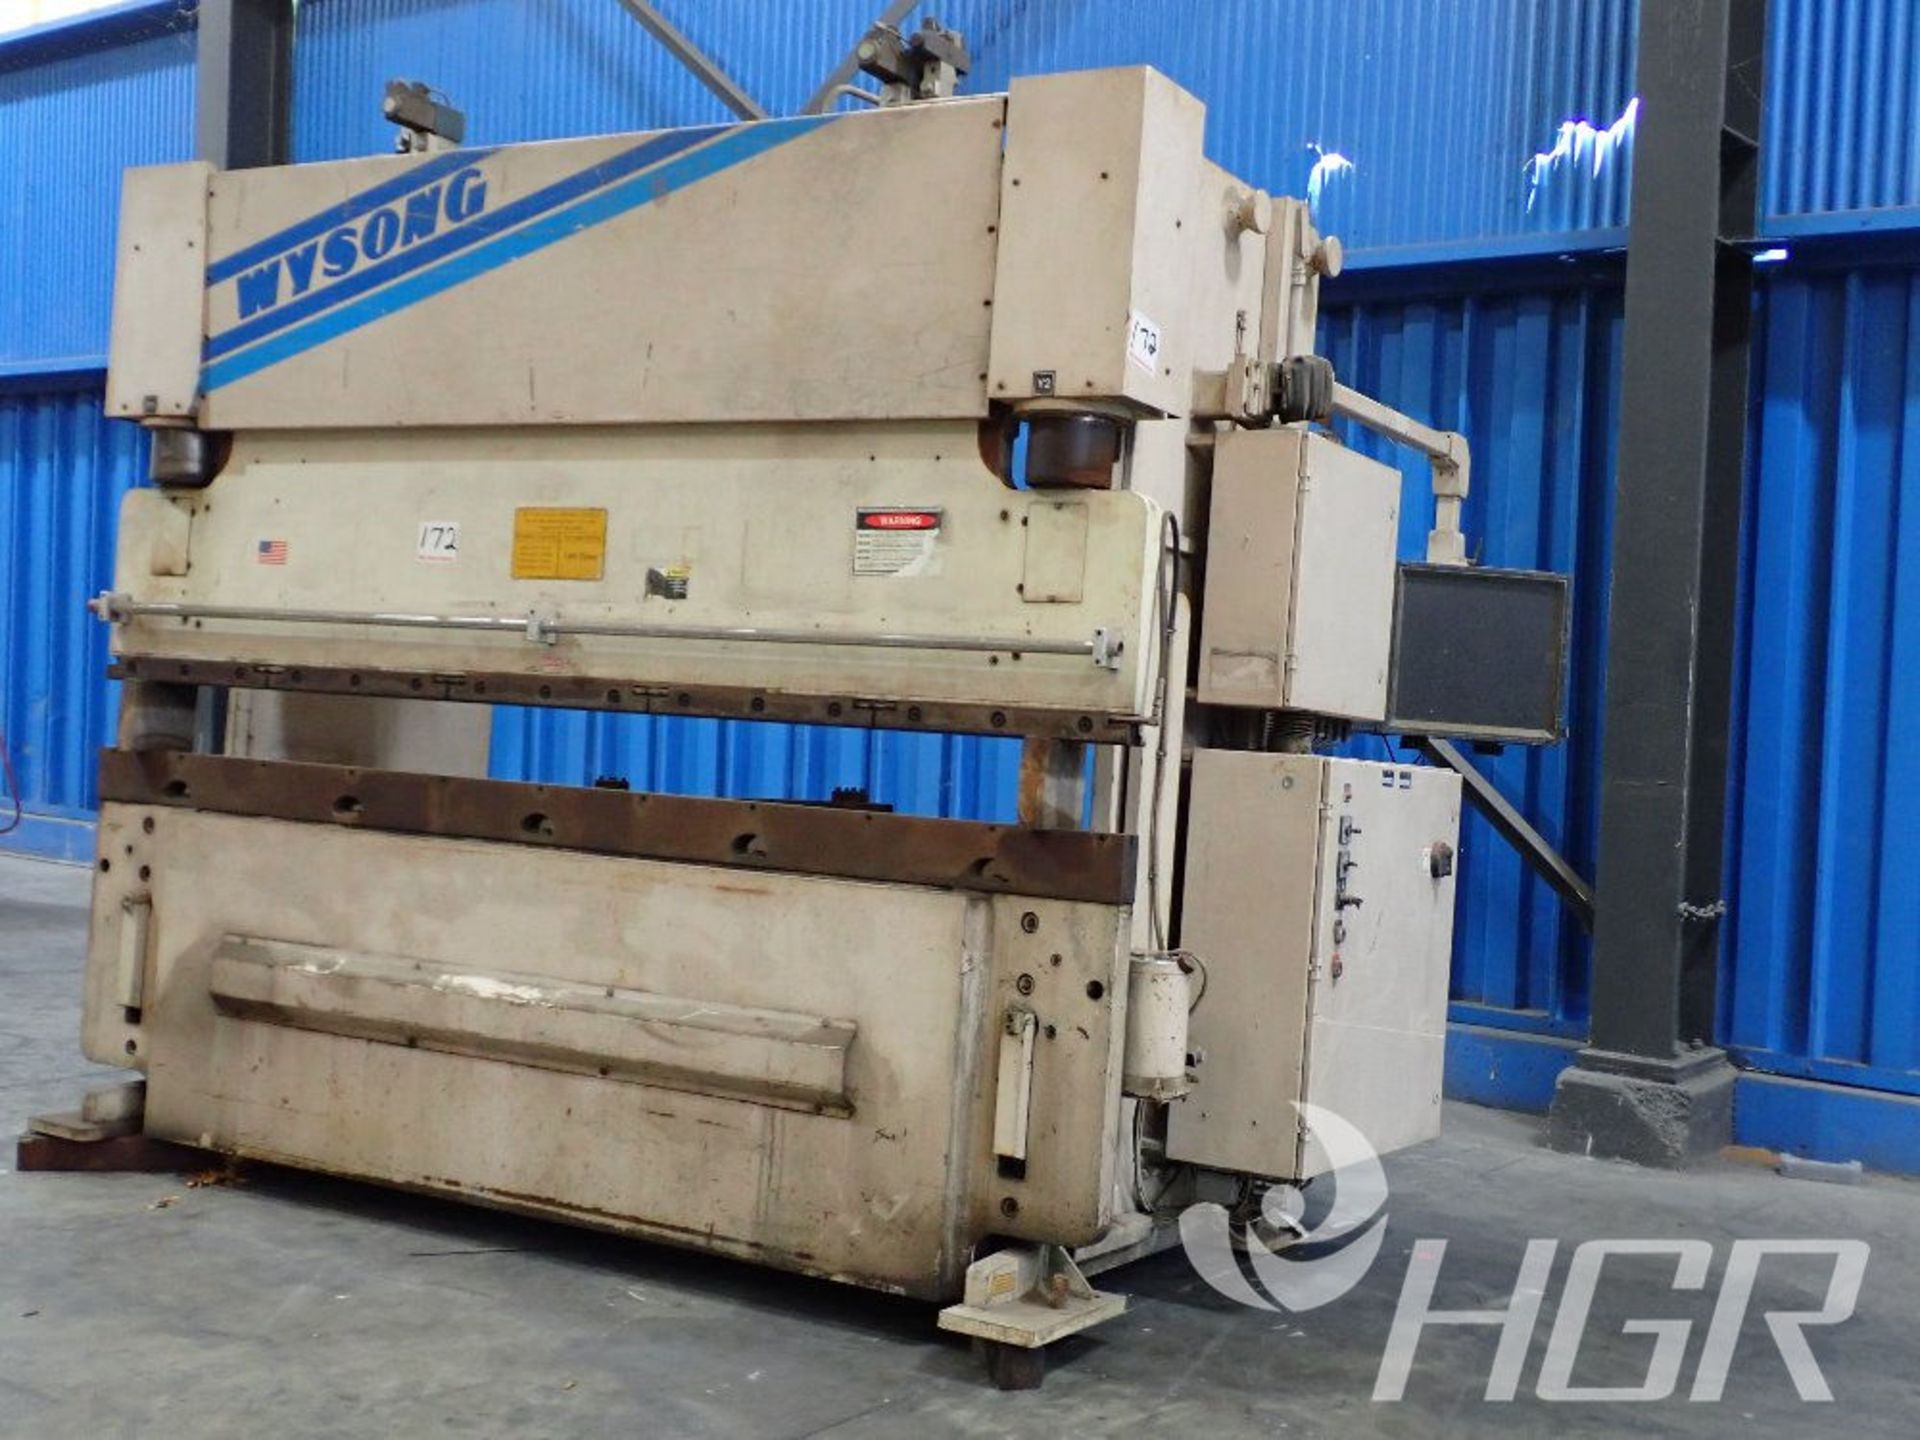 WYSONG CNC PRESS BRAKE, Model PHP100-120, Date: n/a; s/n HPB46-127-X, Approx. Capacity: 100 TON 10',